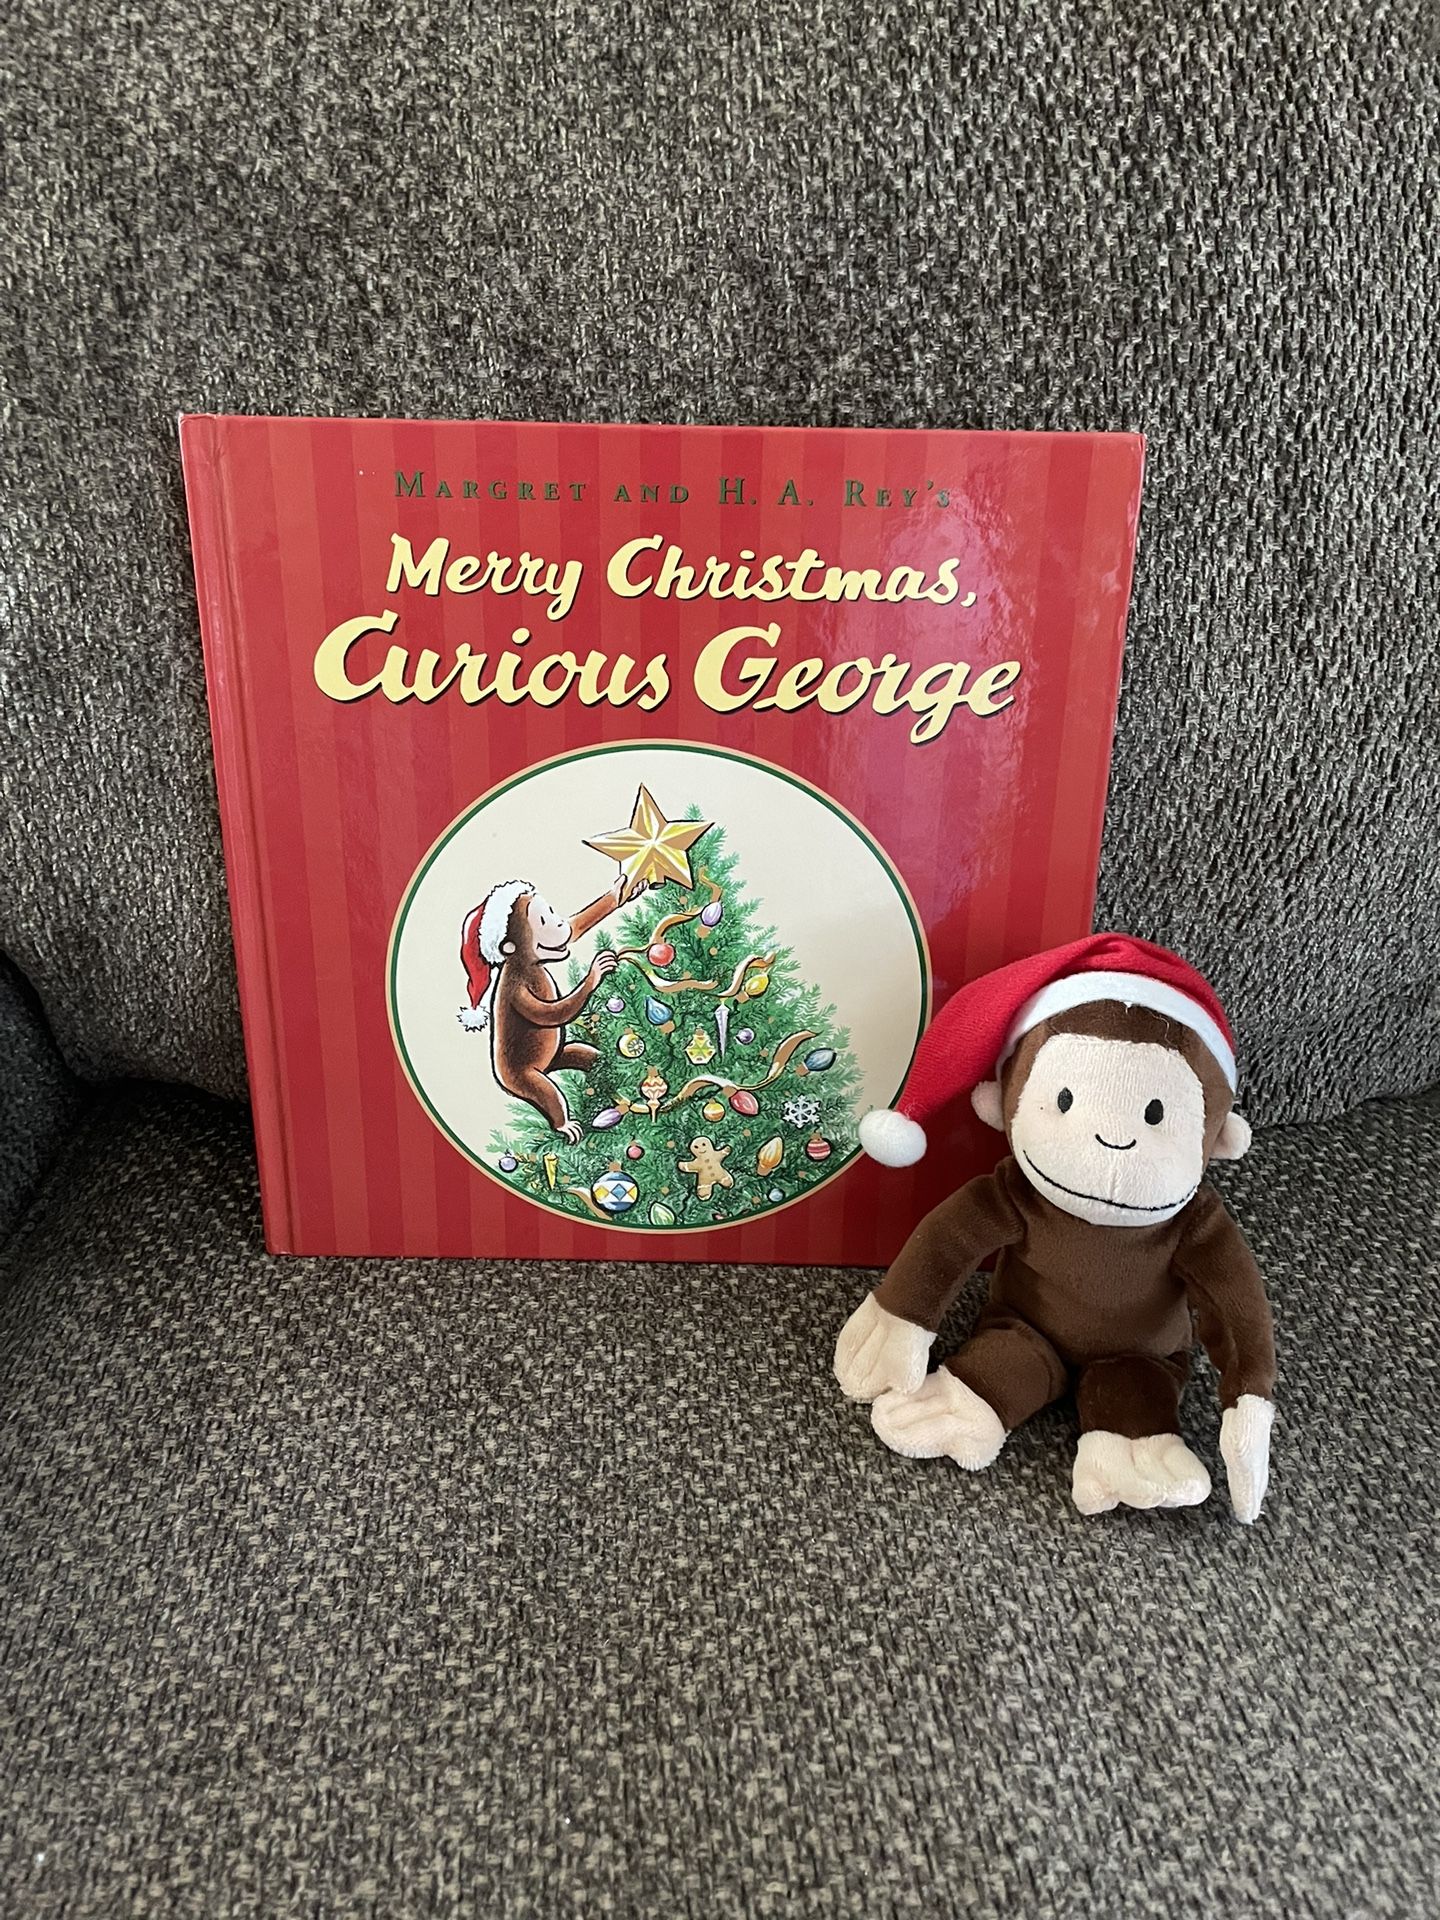 Curious, George Christmas Hard Back Book With Plush Christmas George